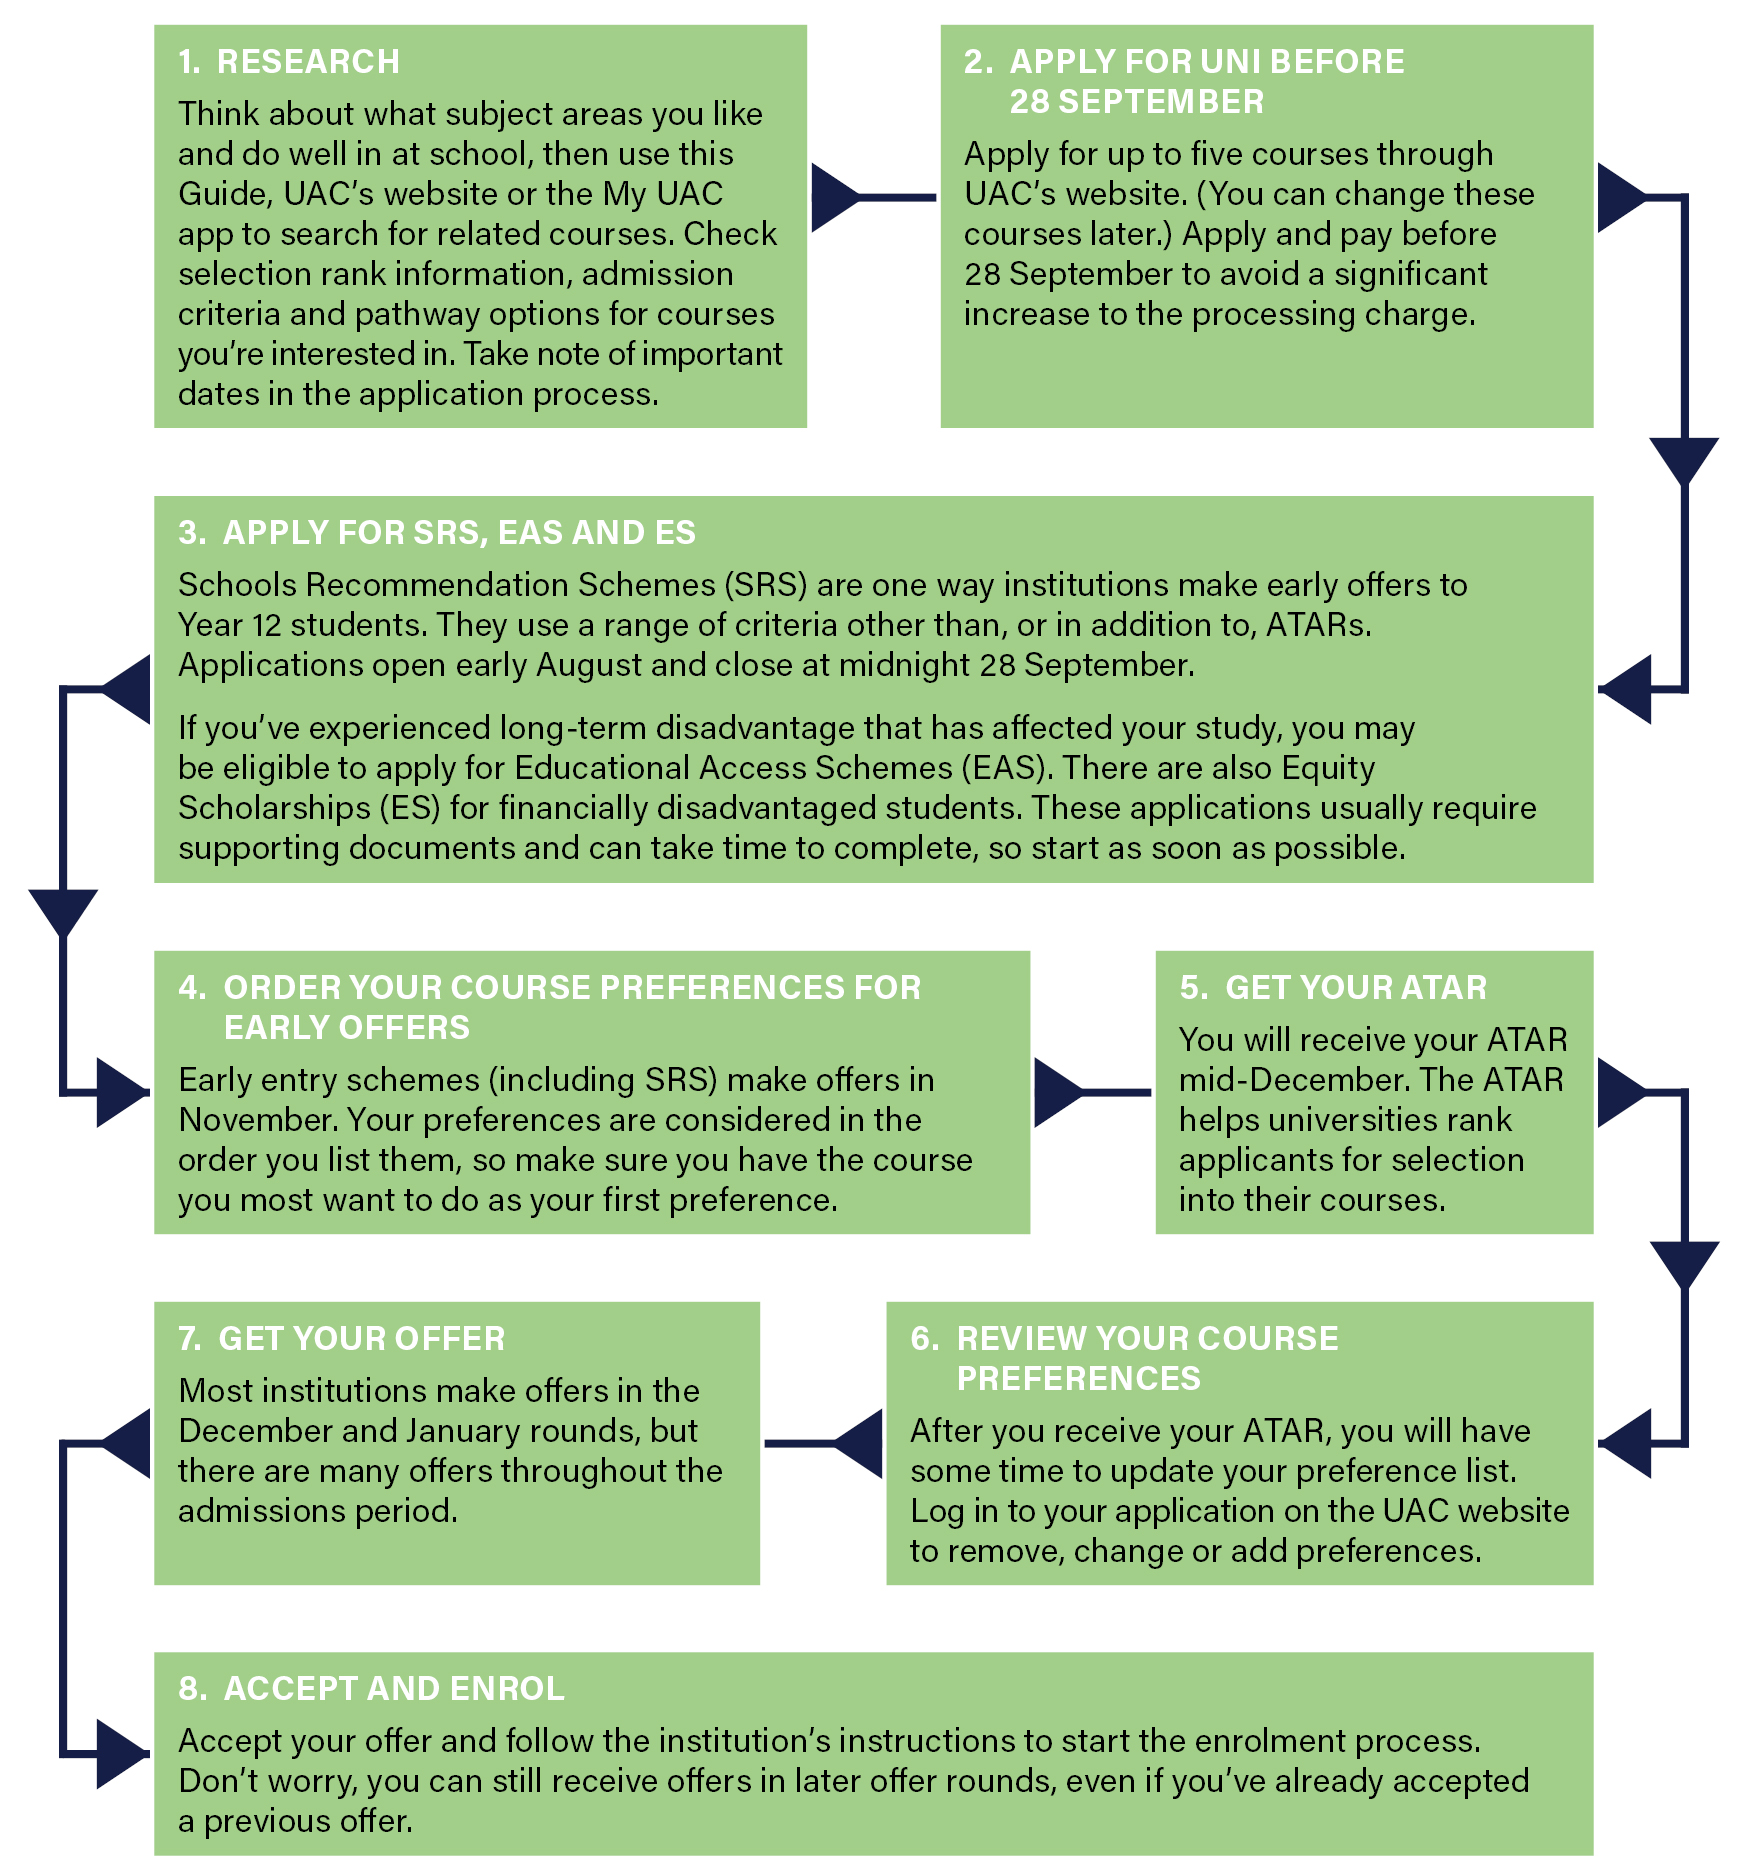 Steps to Study through UAC - a flow chart illustrating the process of applying for uni through UAC